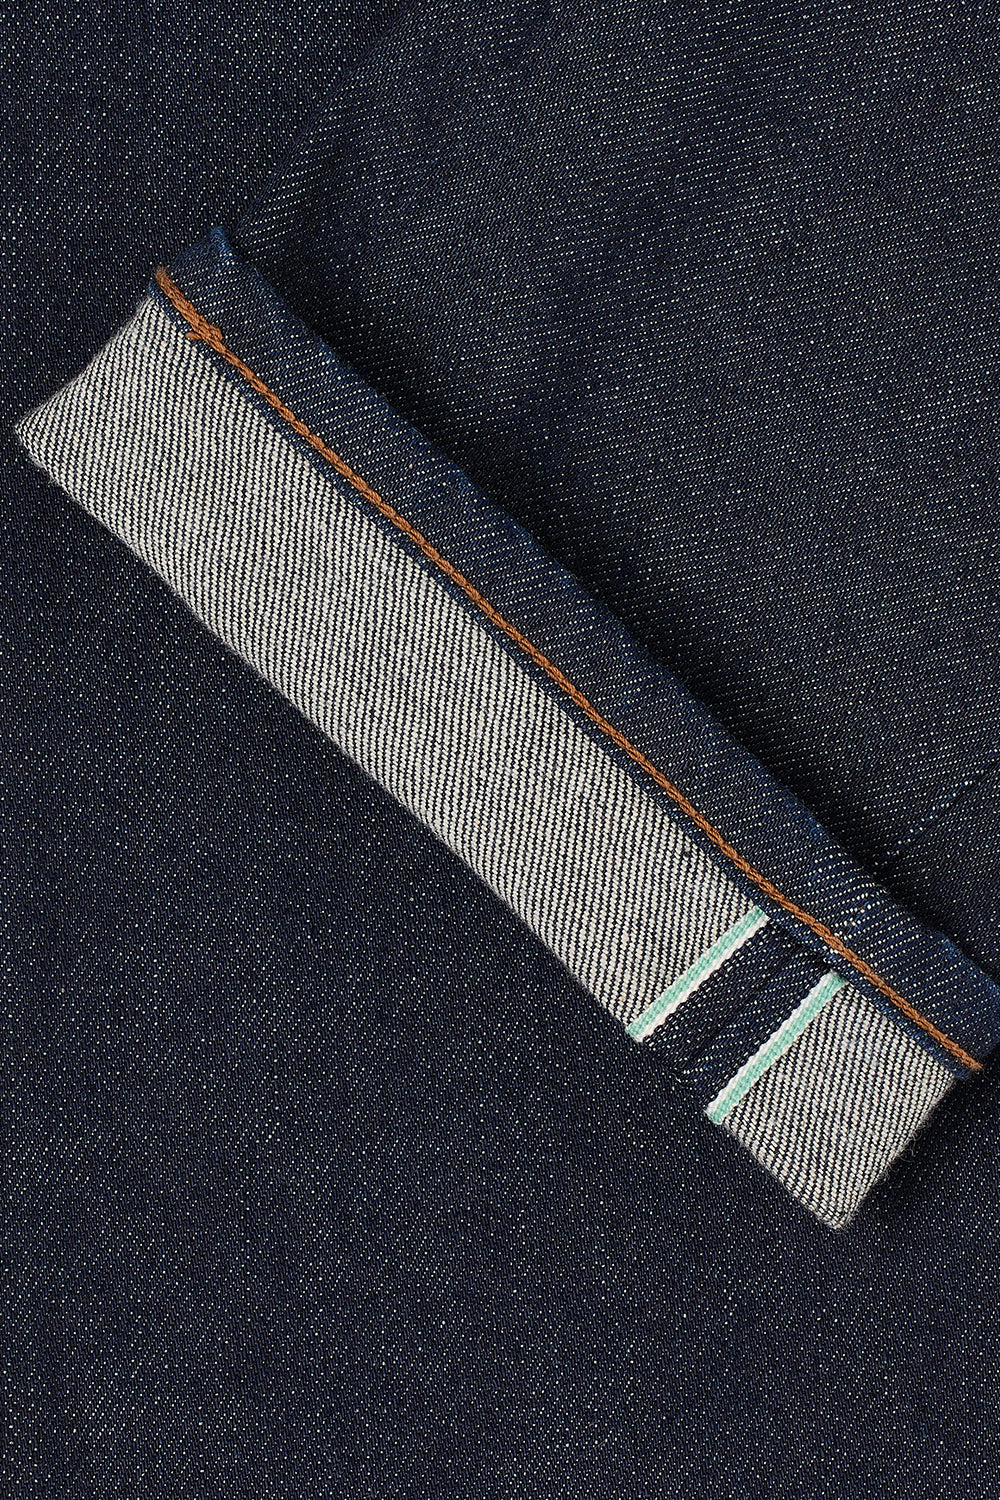 Edwin Regular Tapered Kaihara Rinsed Jeans (Green & White Selvage)